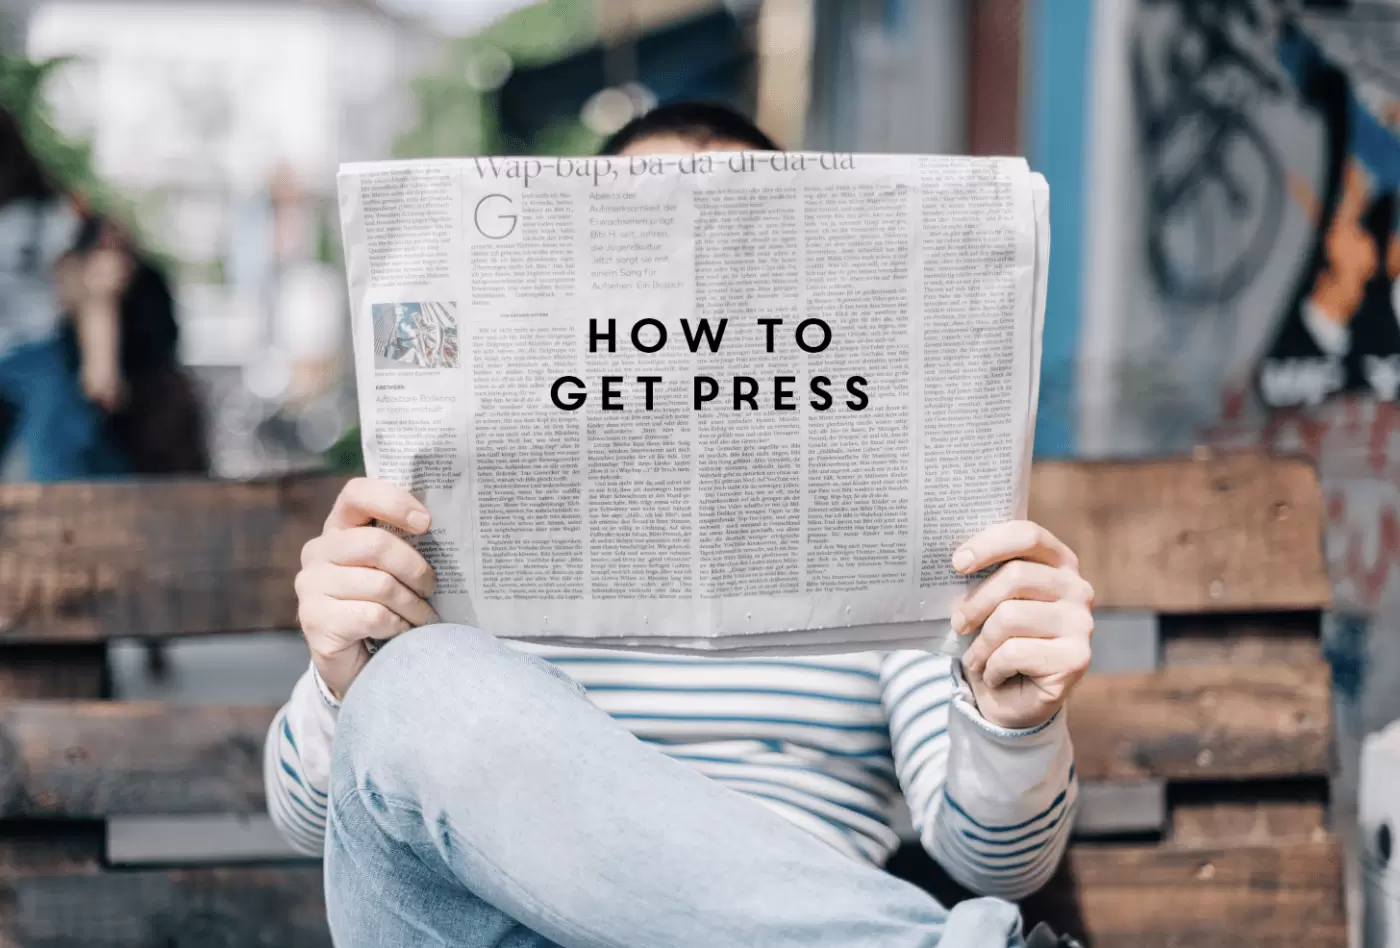 How to get press written on a newspaper being held by a person sat on a bench 